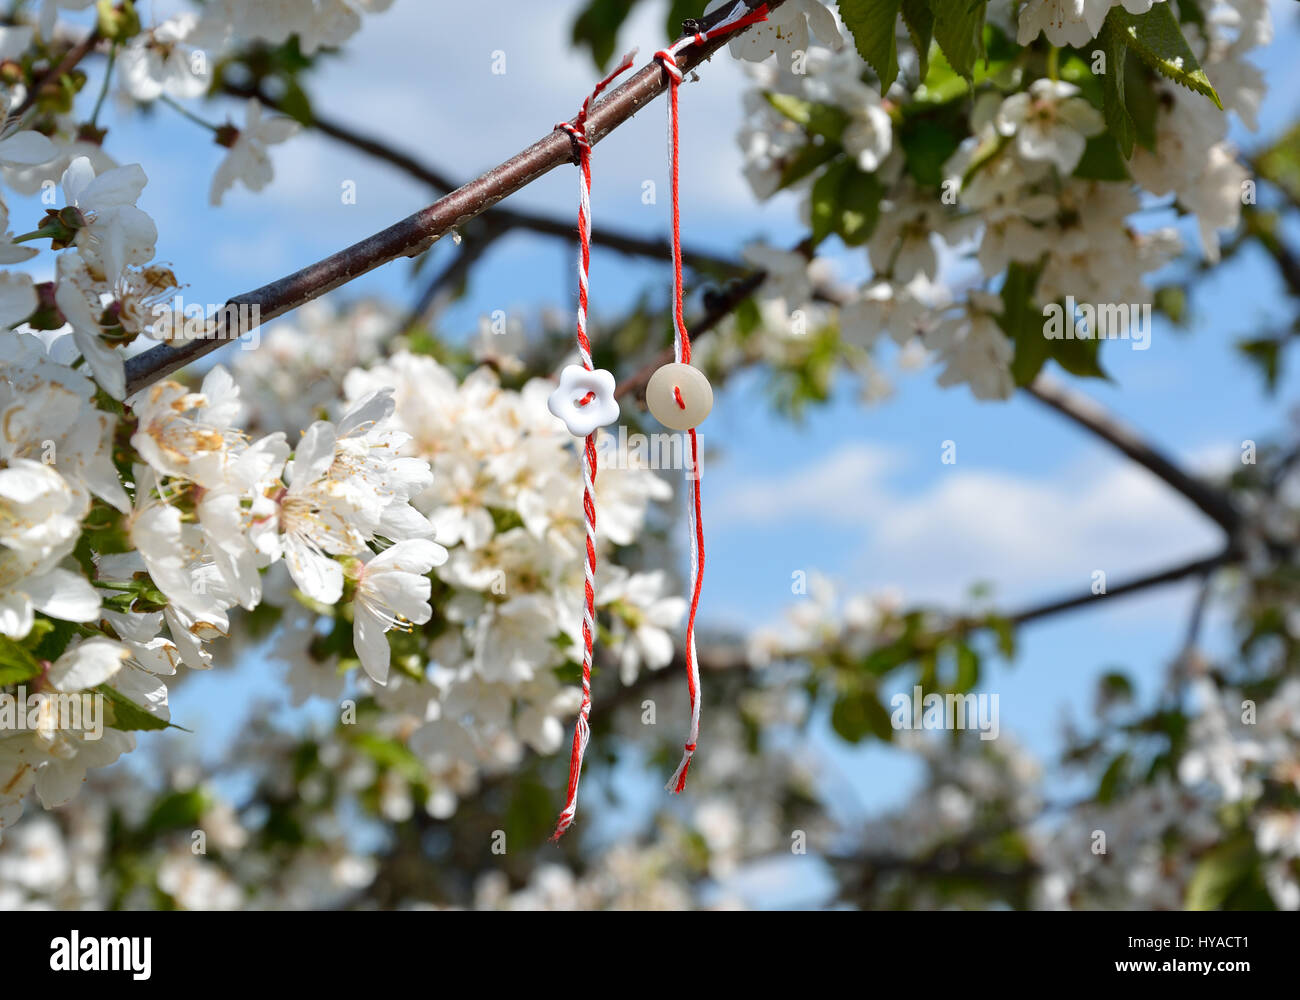 White and red threads tied together, like bracelets, hanging in the branch of a cherry blossom tree Stock Photo